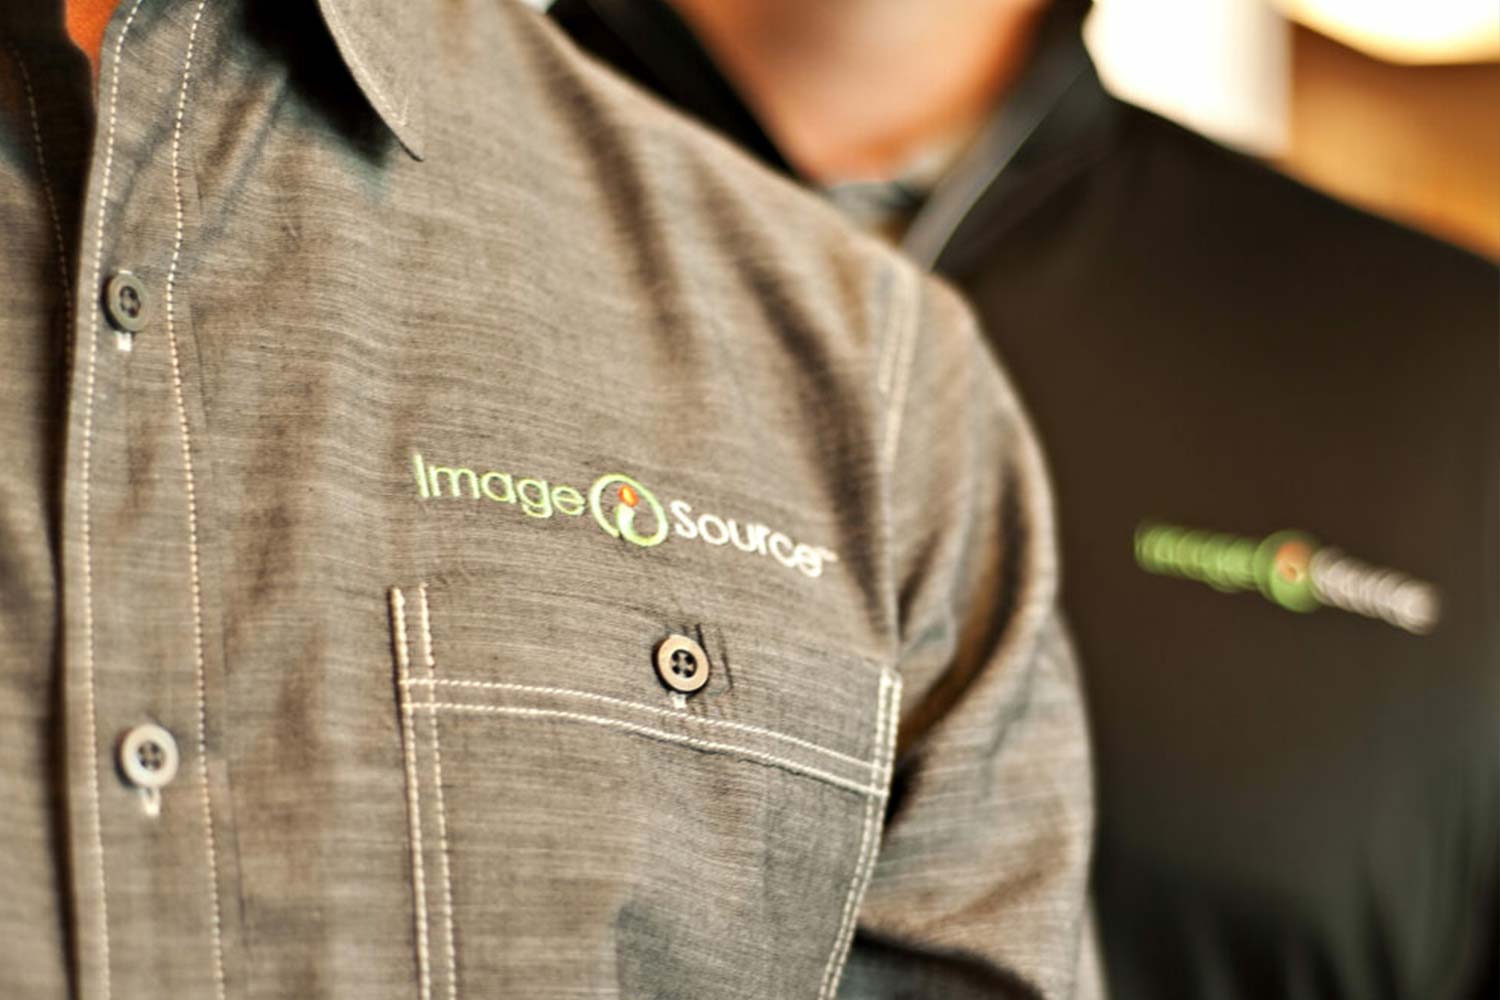 Close up image of man wearing gray button shirt with Image Source logo embroidered on the left chest.